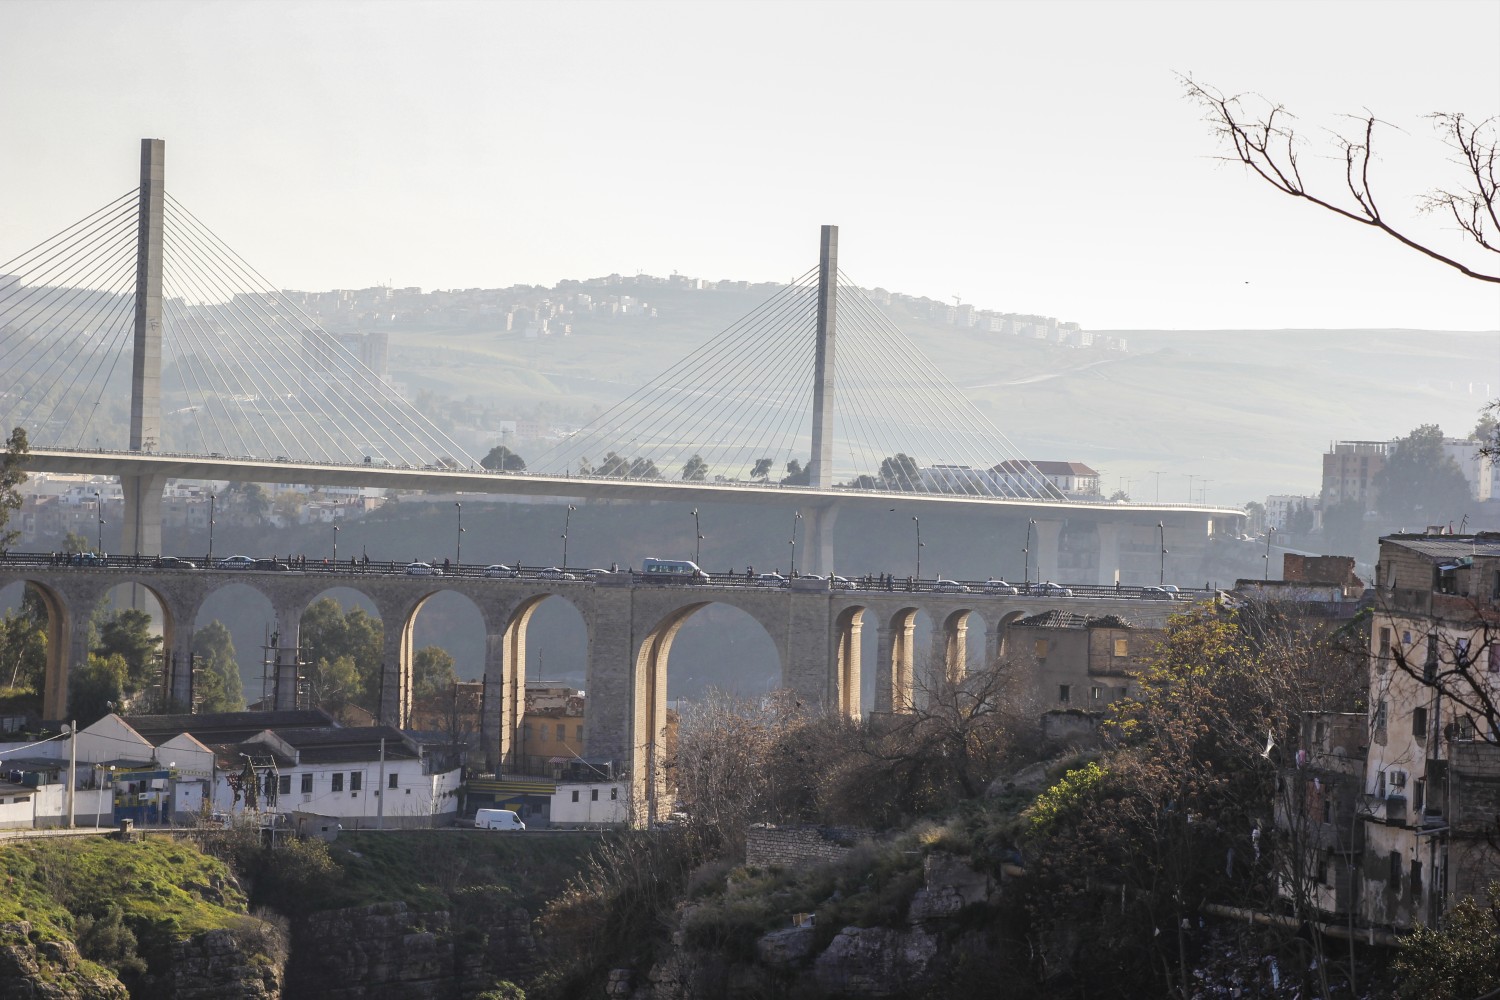 View of the stone bridge from west, with the Pont Géant Salah Bey visible in the background